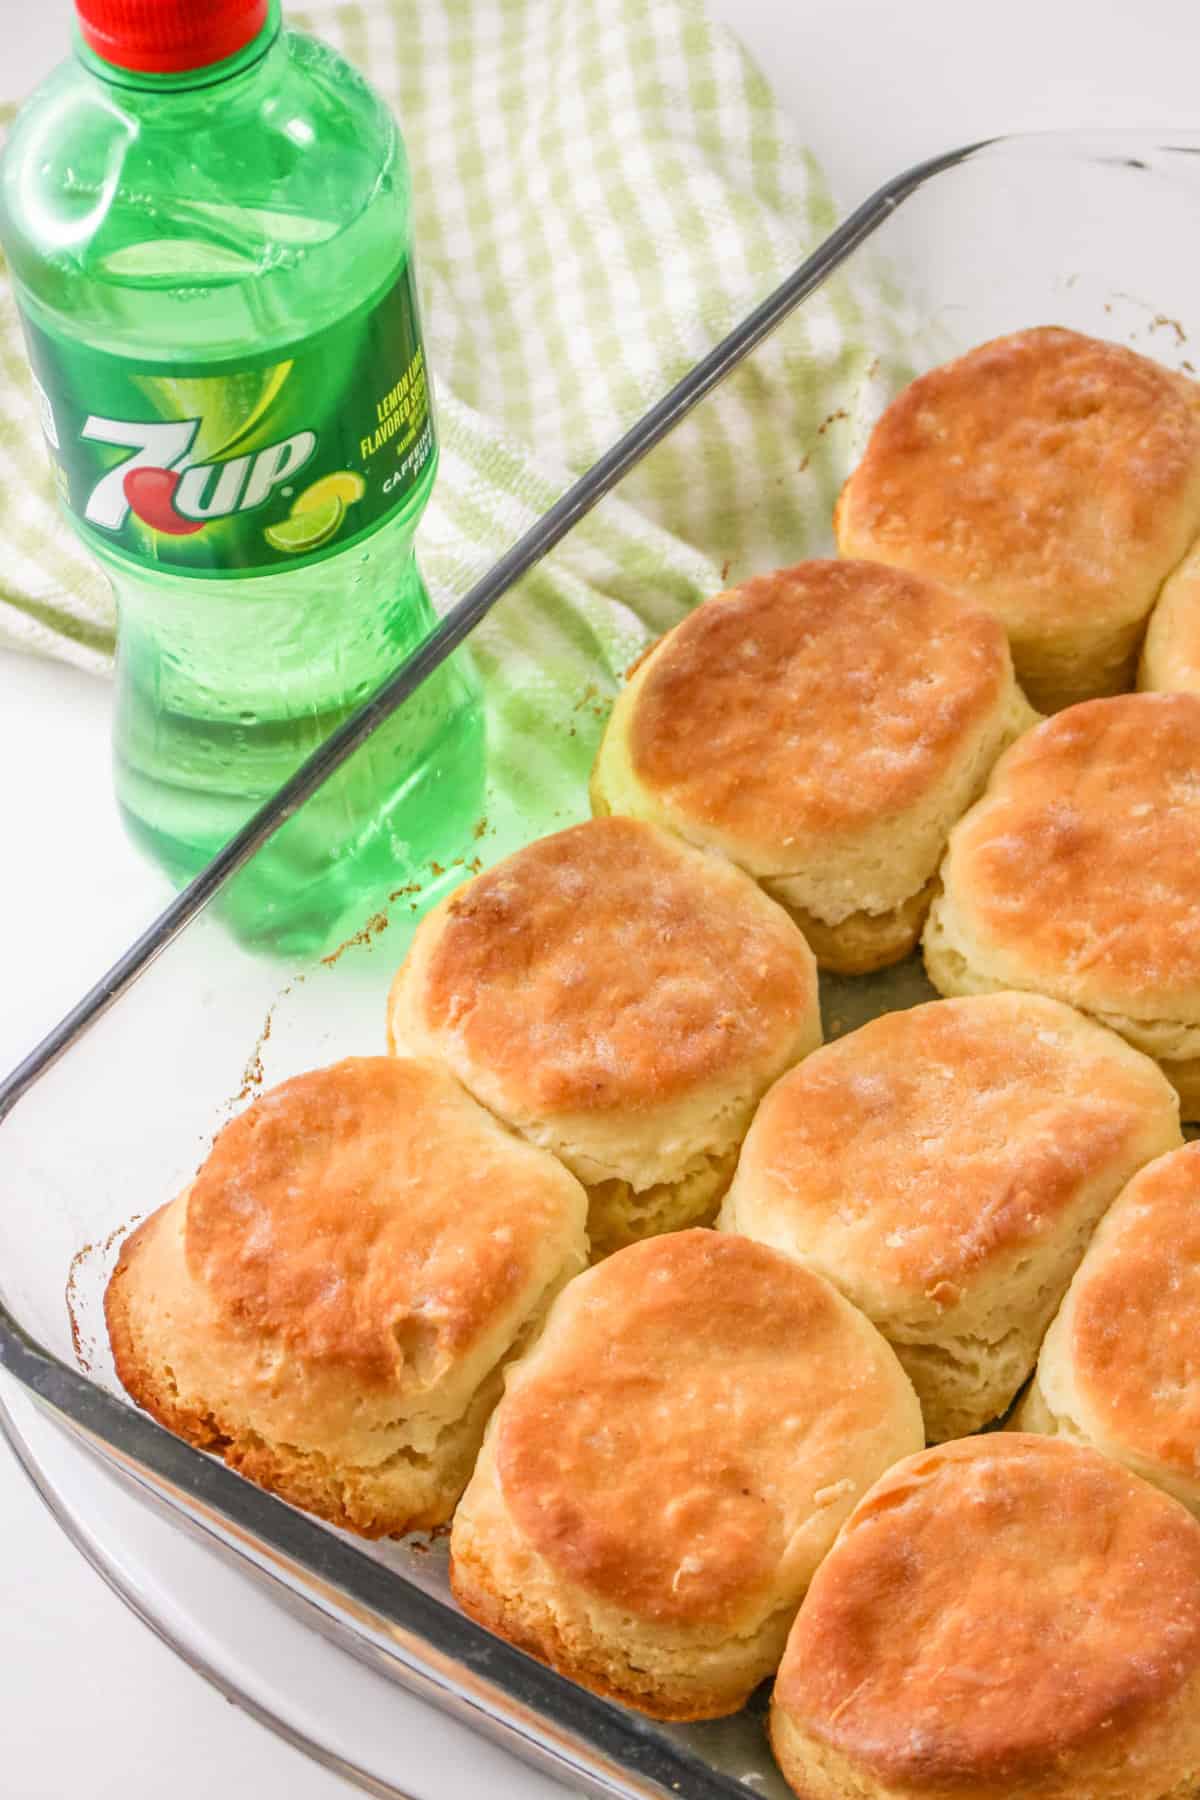 Bisquick biscuits with 7 up beside the baking dish.